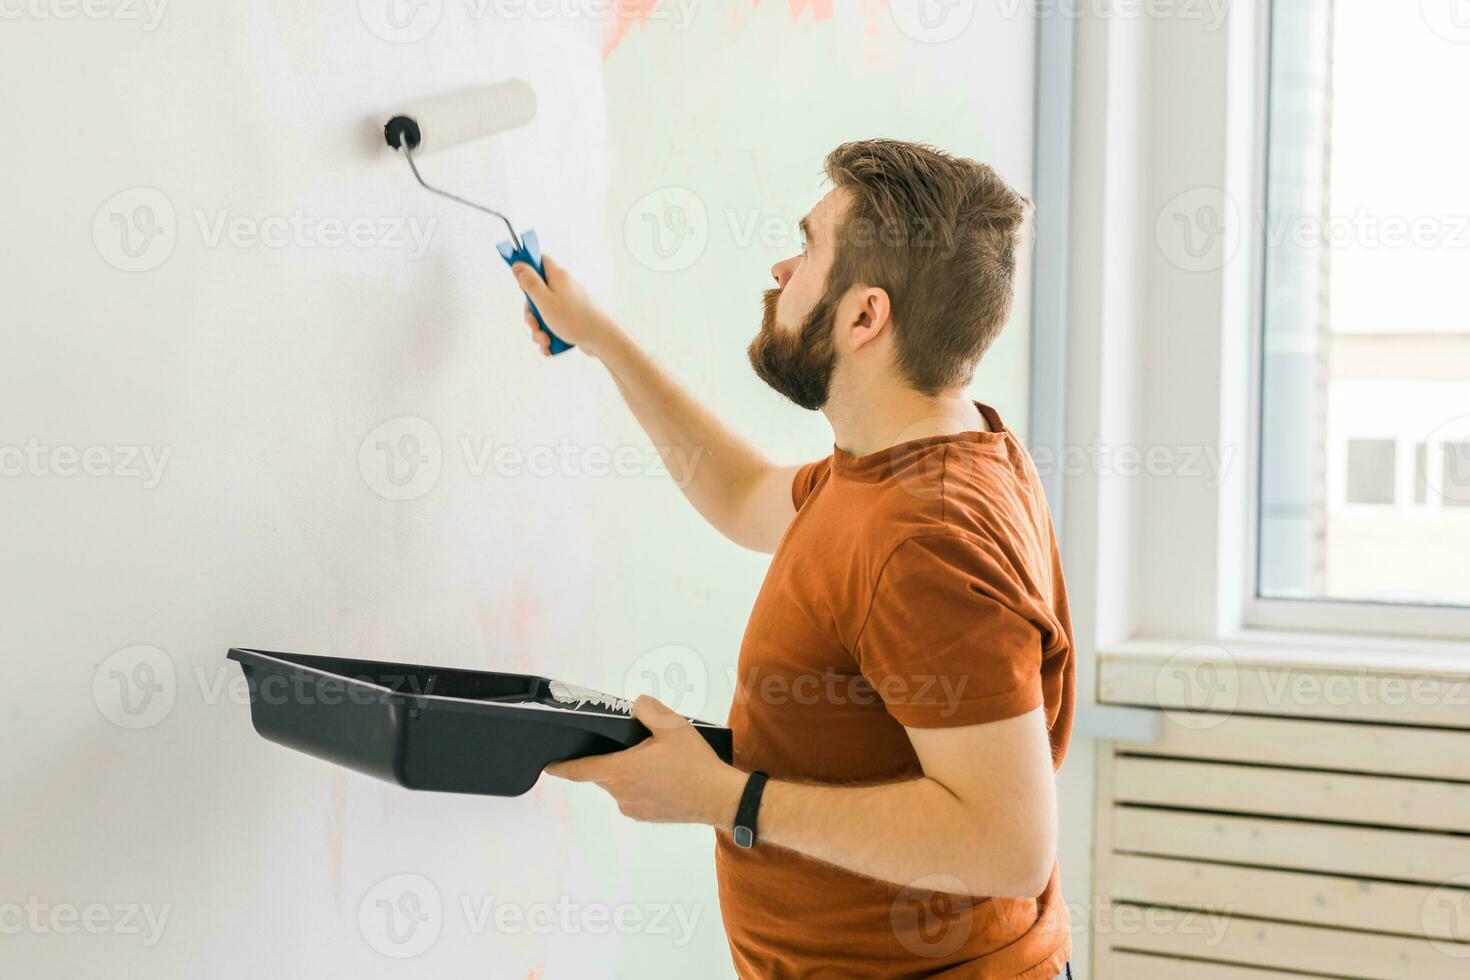 Man painting wall with paint roller - renovation and redecoration concept photo